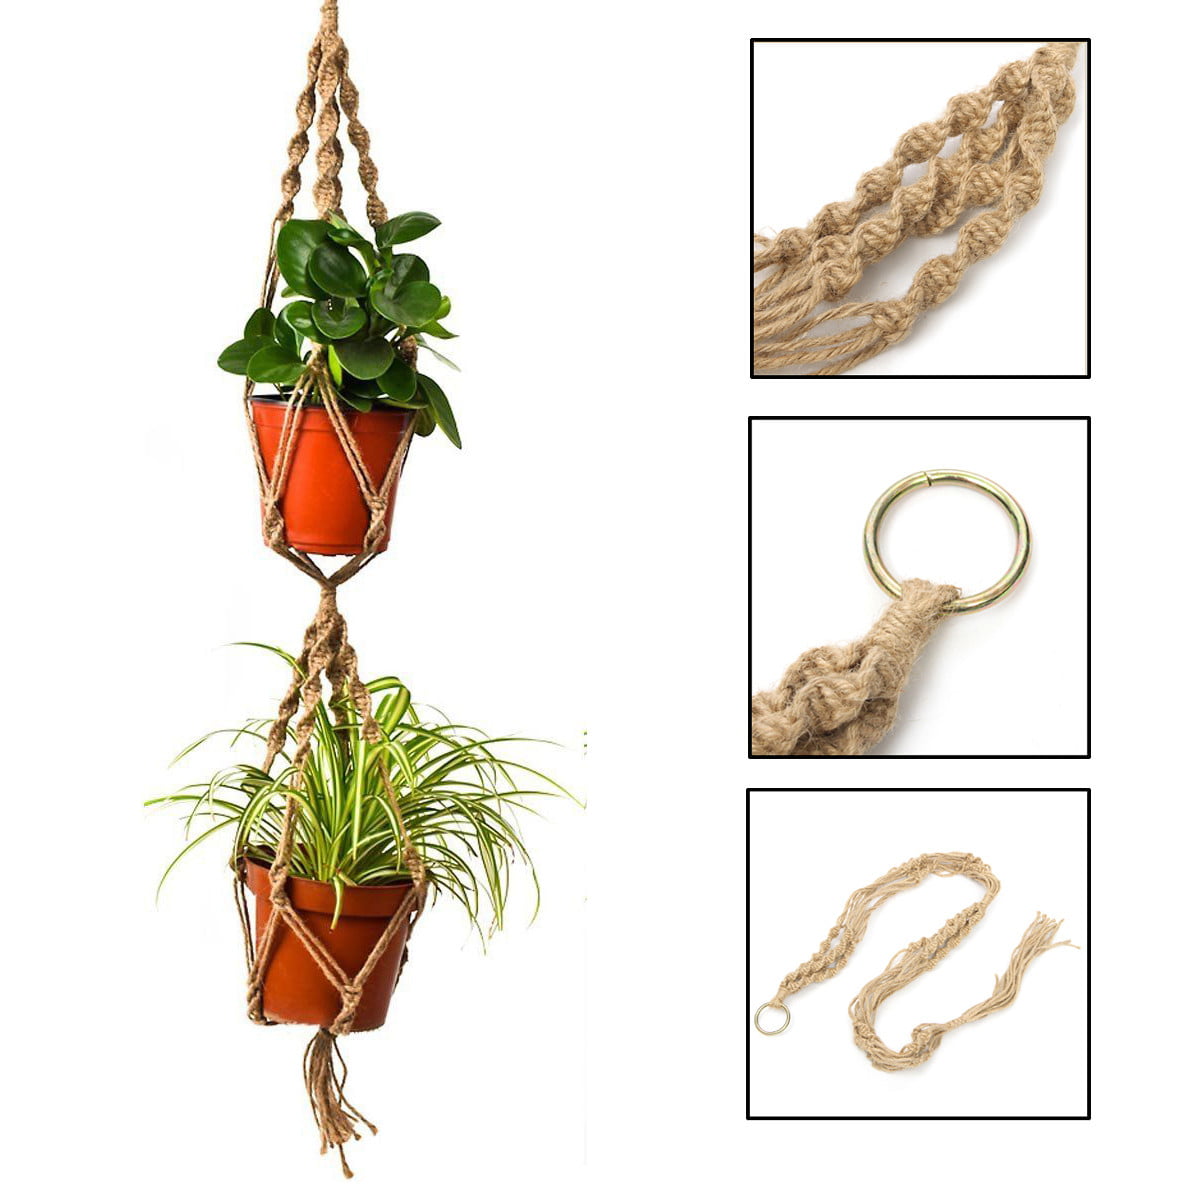 Details about  / Gift Pot Holder Hanging Basket Handcrafted Braided Macrame Cord Plant Hanger S2